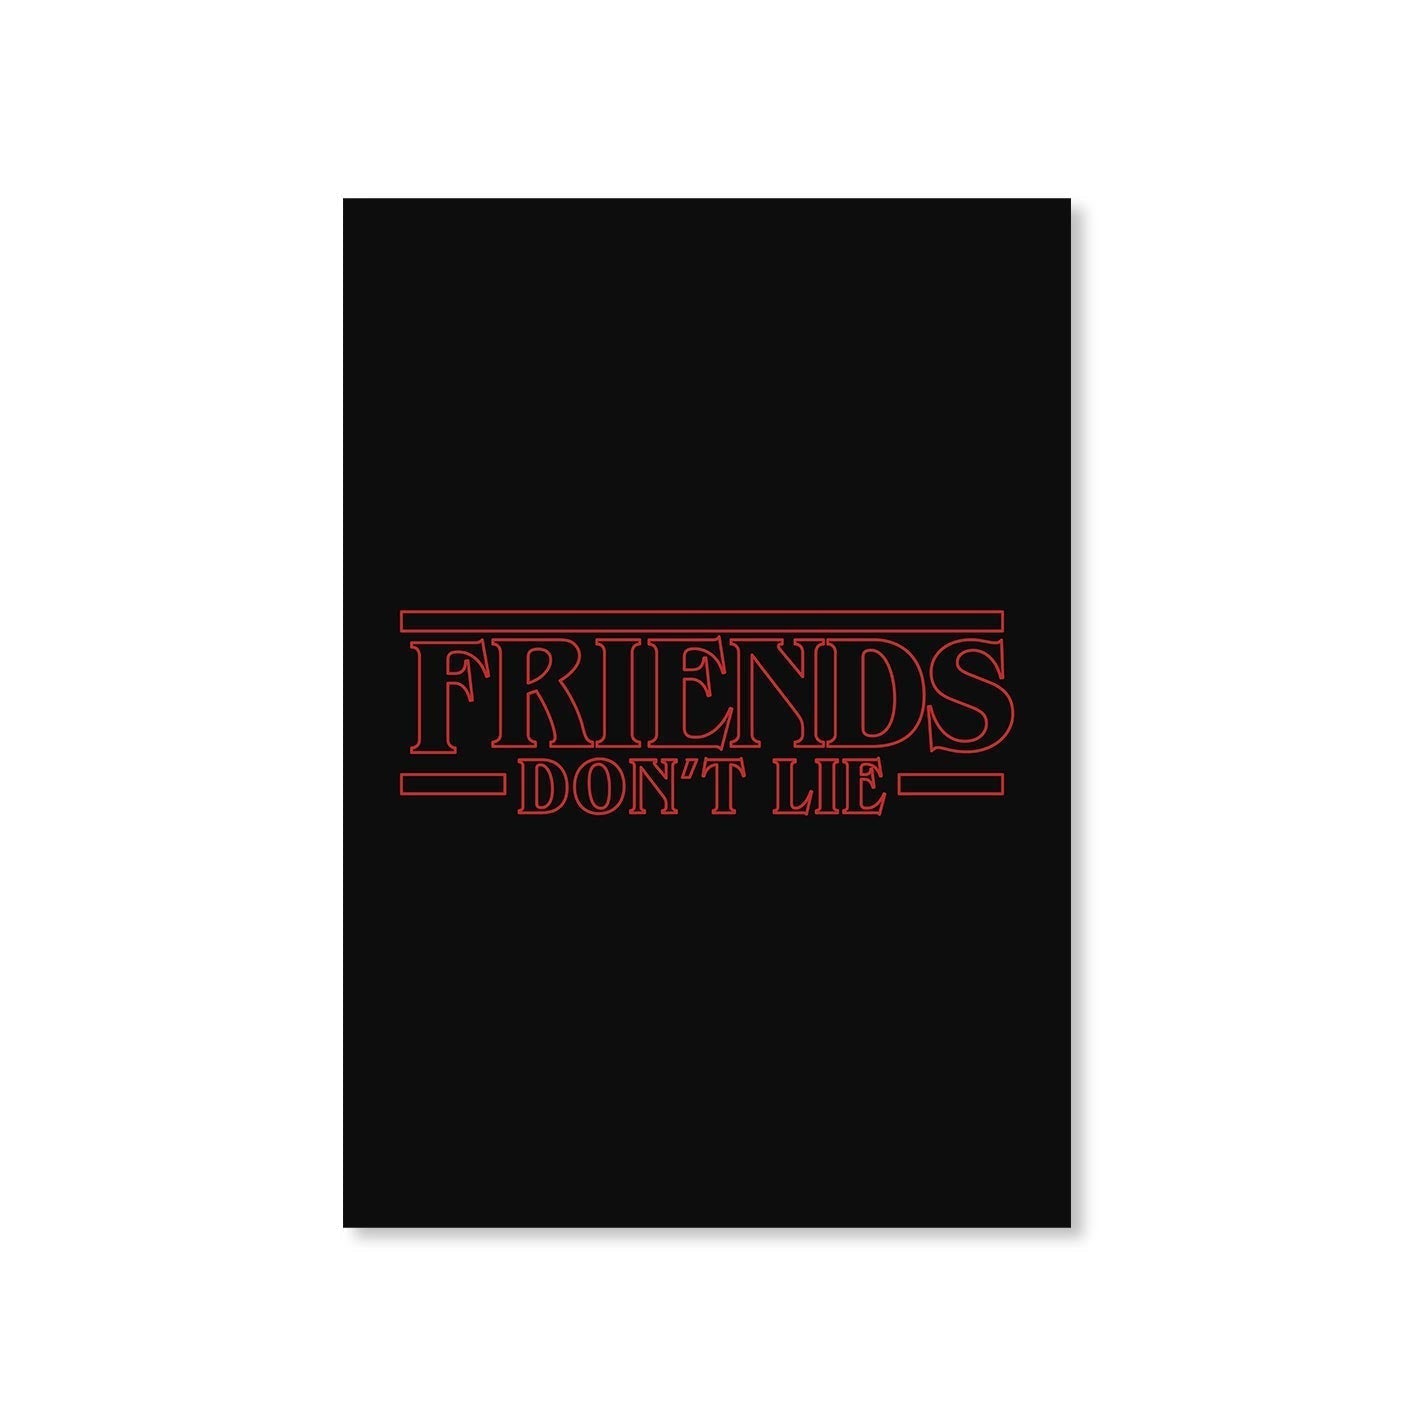 stranger things friends don't lie poster wall art buy online united states of america usa the banyan tee tbt a4 stranger things eleven demogorgon shadow monster dustin quote vector art clothing accessories merchandise